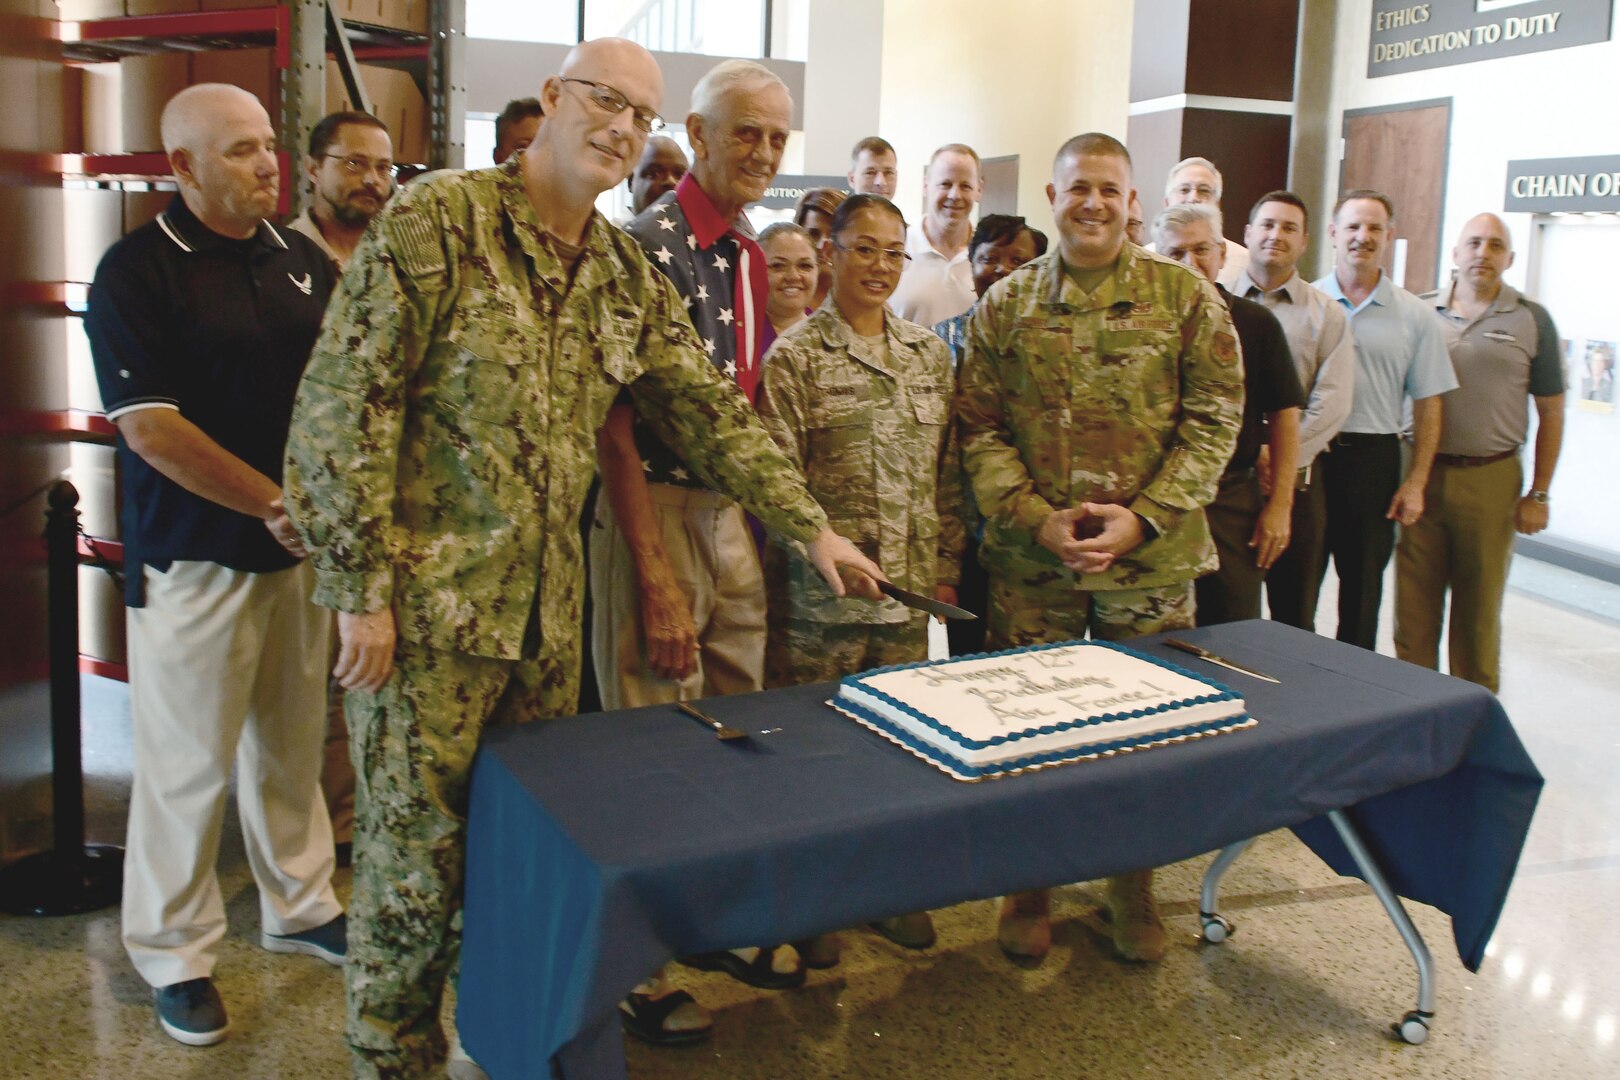 A group of people gathered around a cake celebrating the 72nd anniversary of the Air Force.